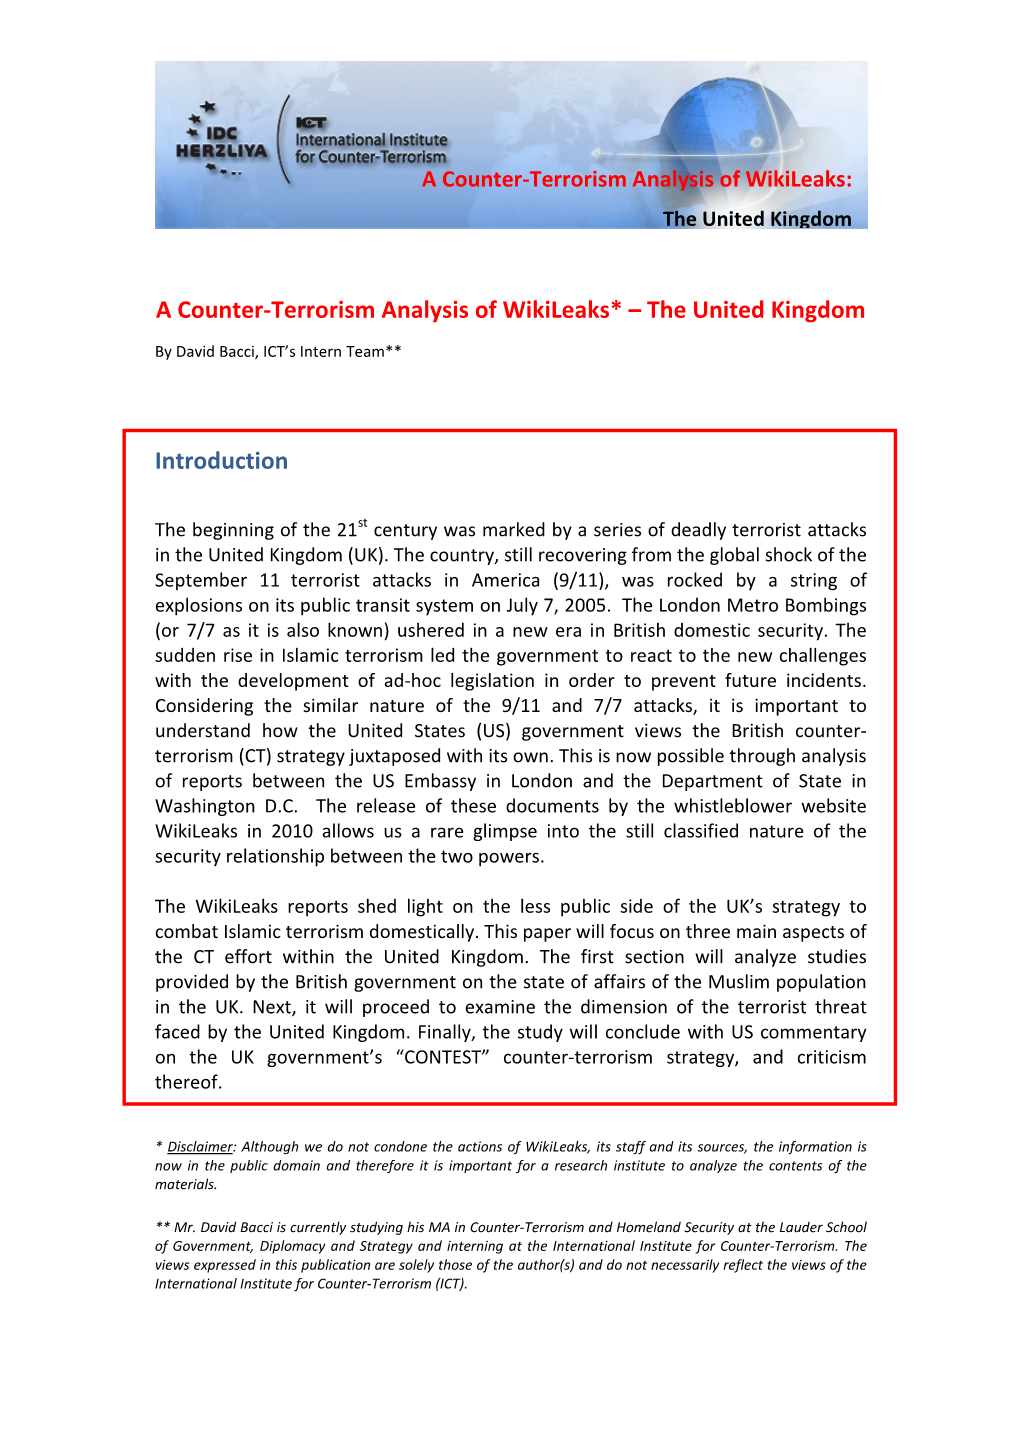 A Counter-Terrorism Analysis of Wikileaks